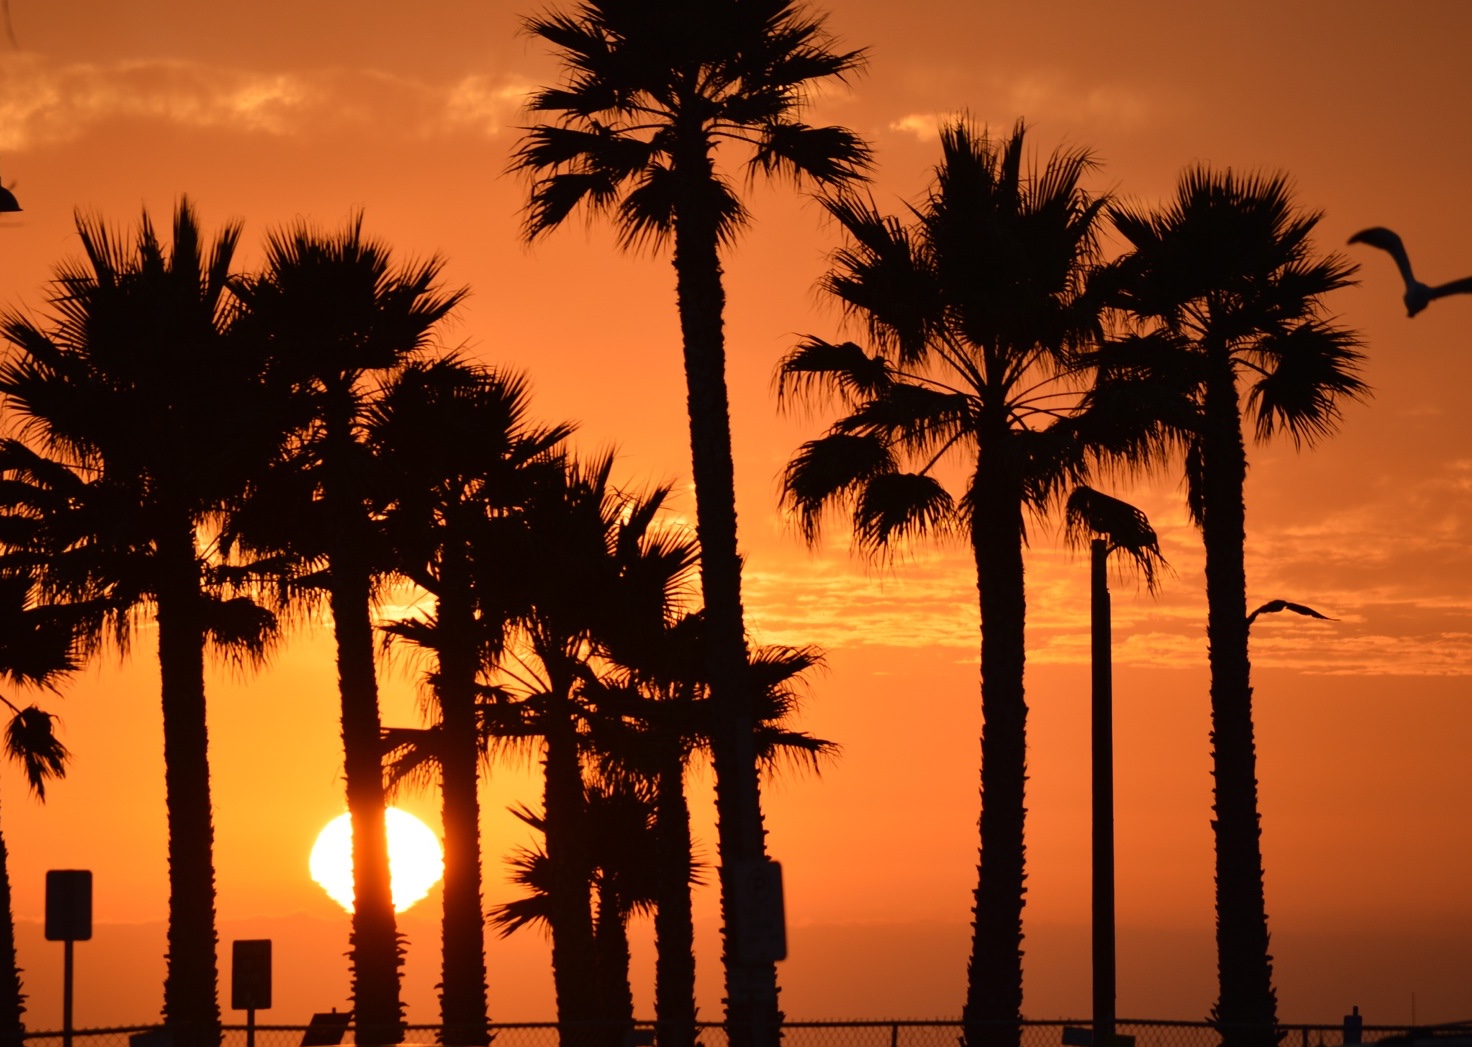 Palm trees with setting sun and orange sky